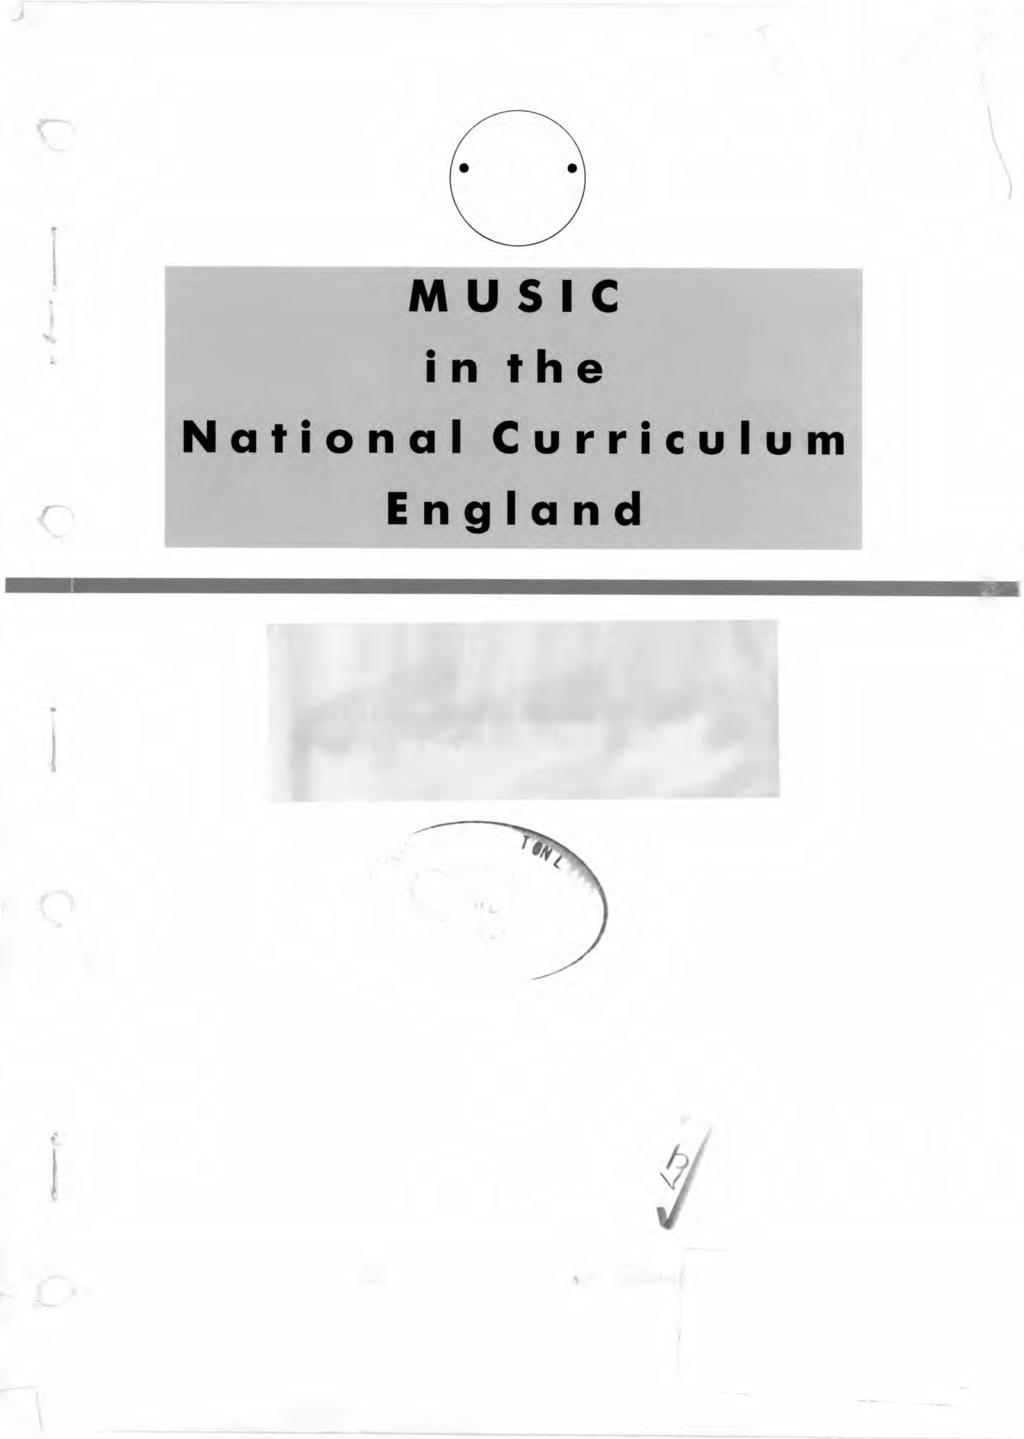 MUSIC in the National Curriculum (England) This has